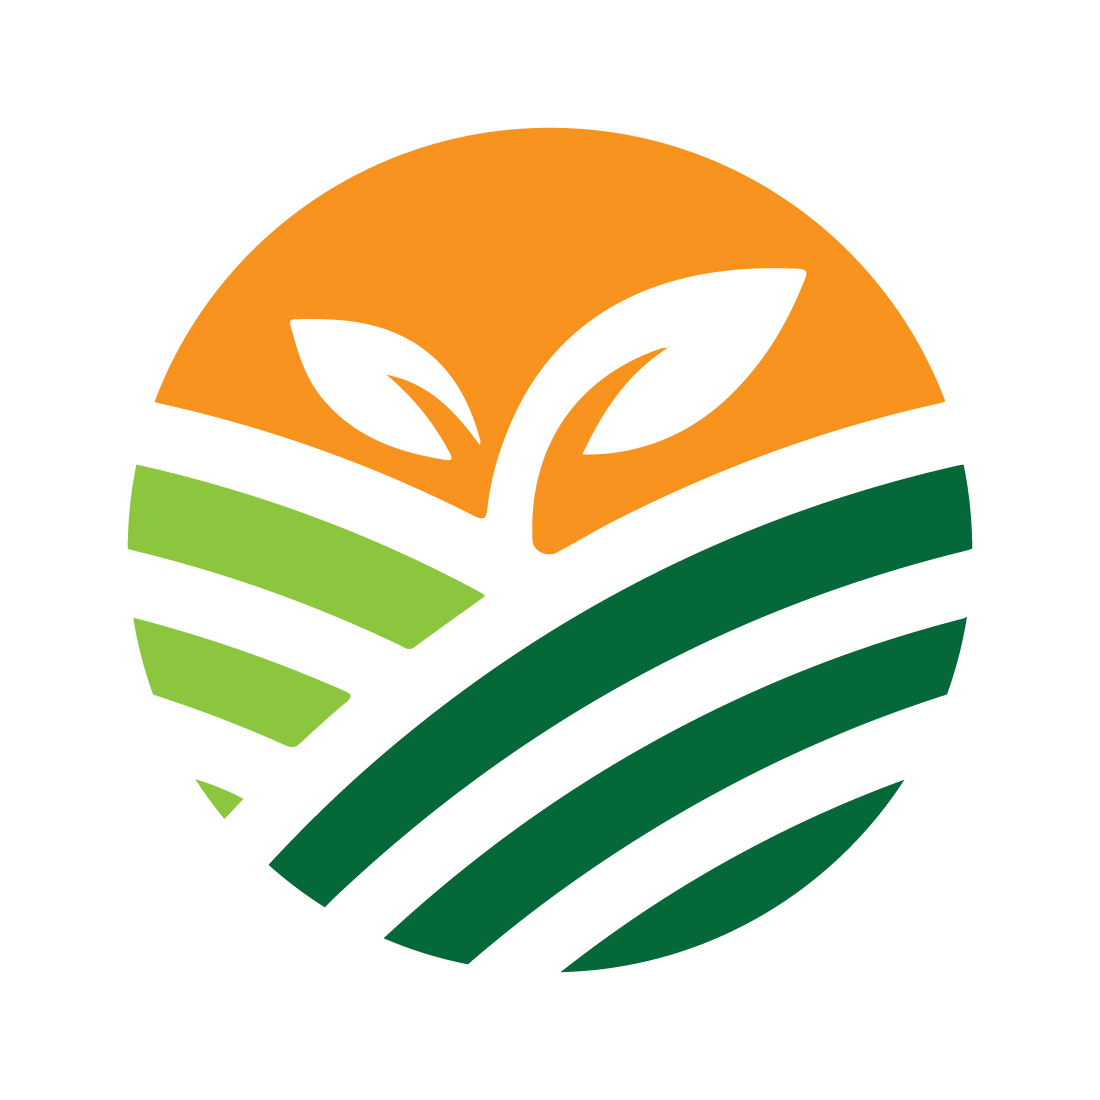 Farm Plant Tree Vector Icon Design for your company cover image.